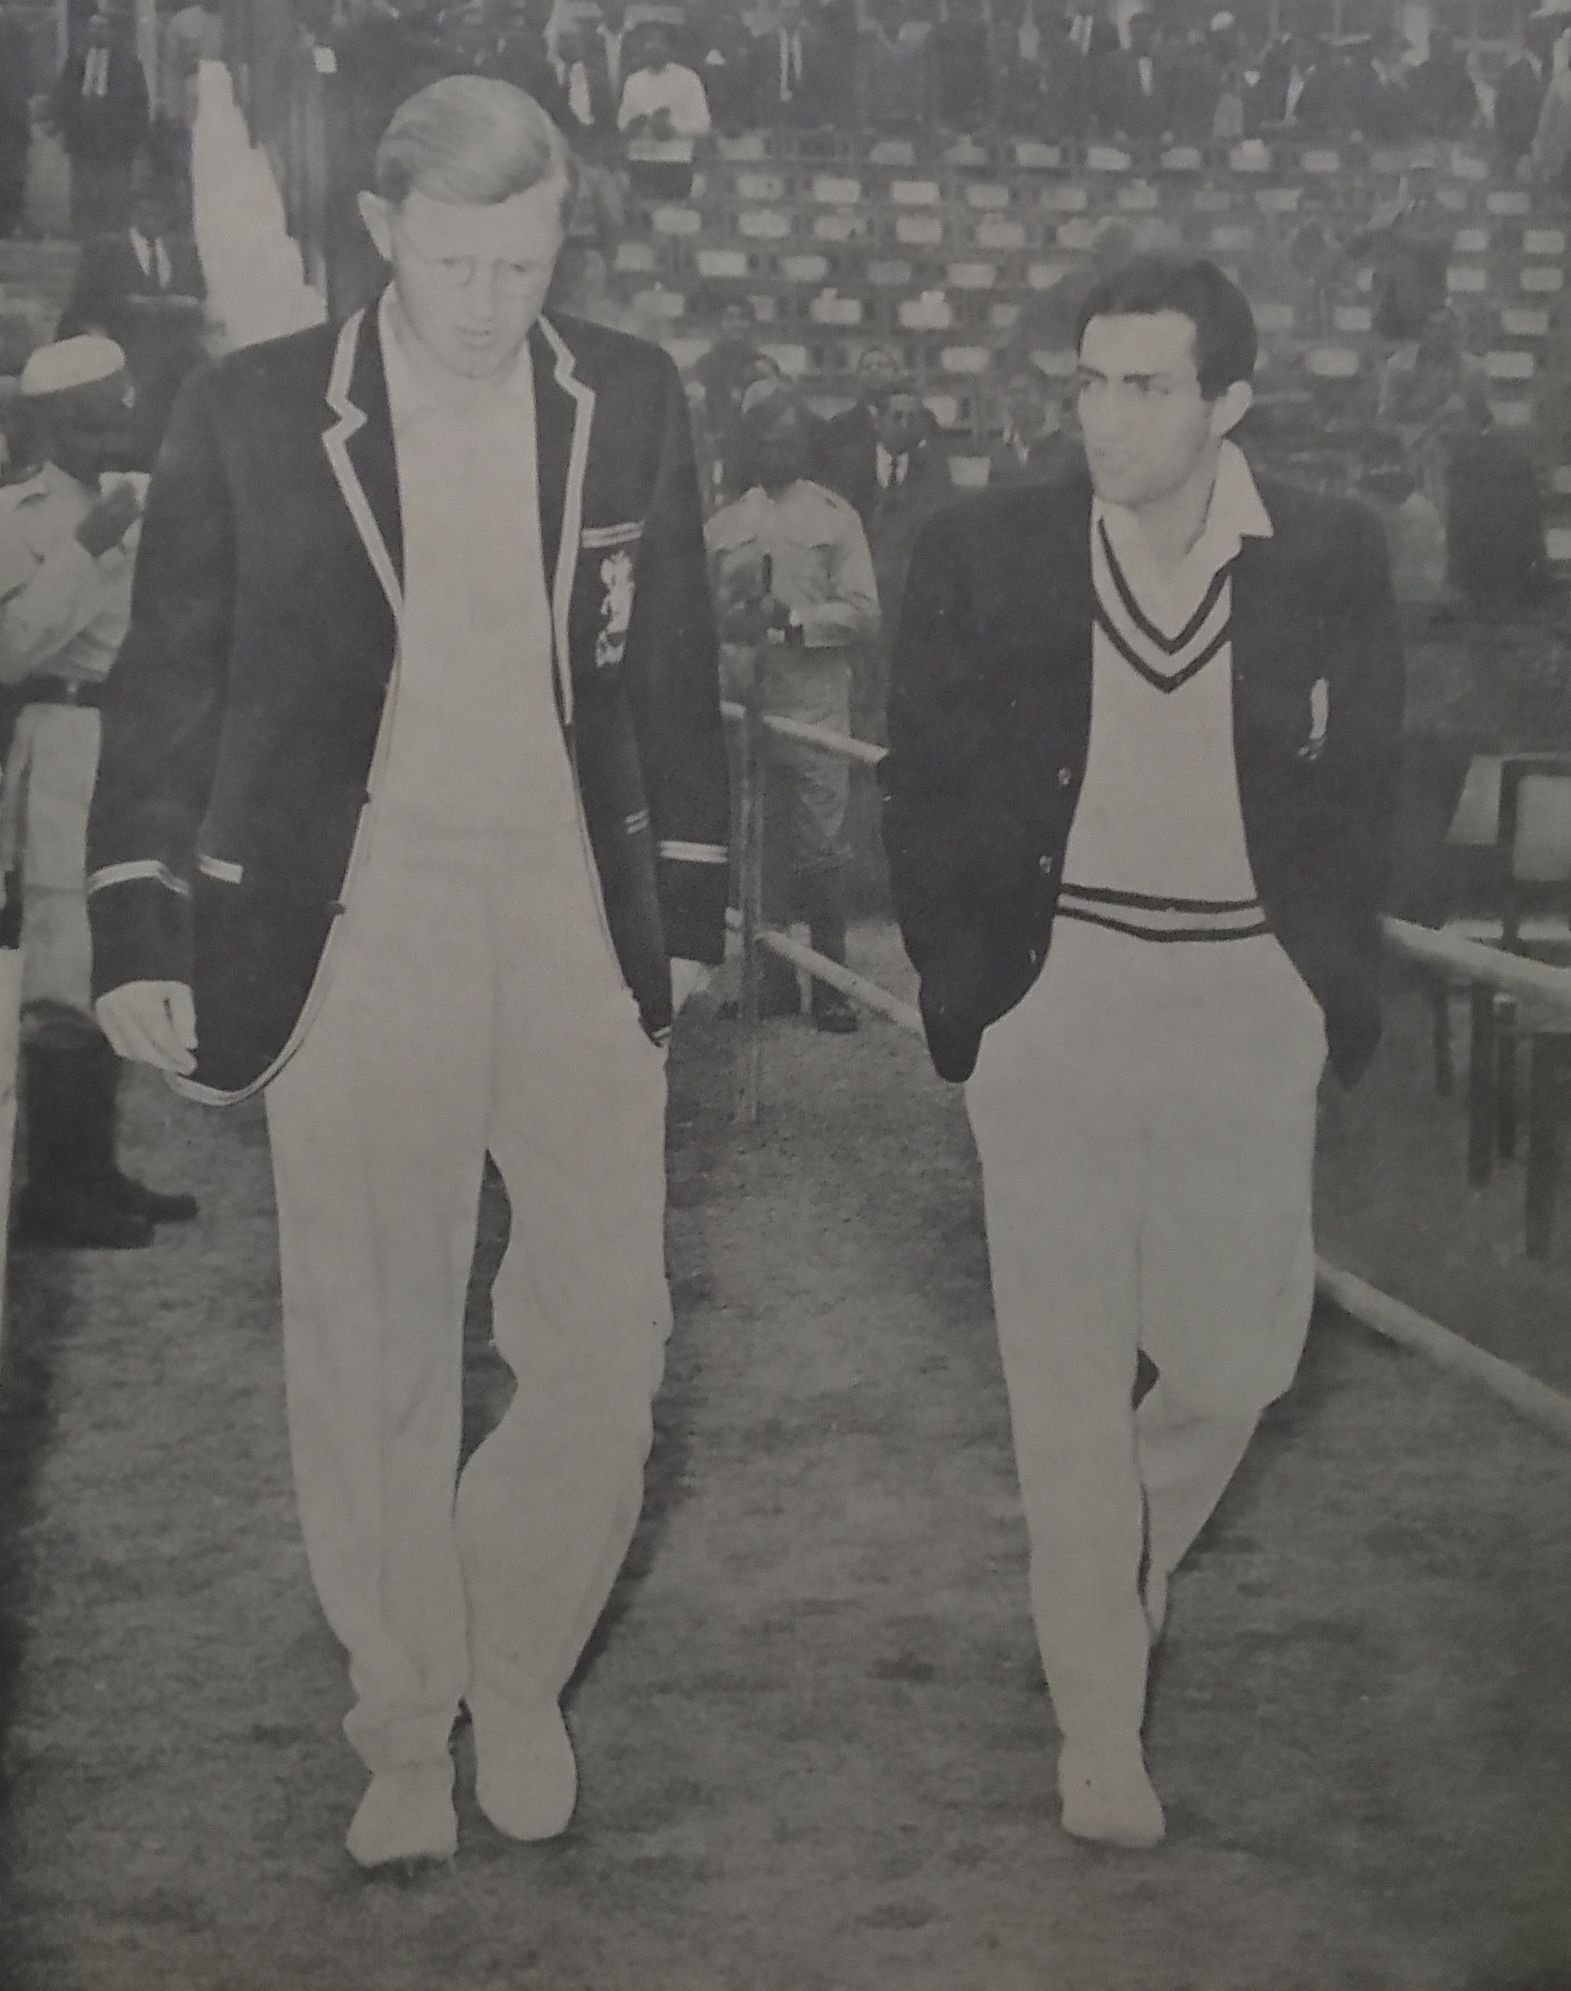 Mike Smith and Tiger Pataudi head out for the toss on the first day of Delhi Test Feb 1964